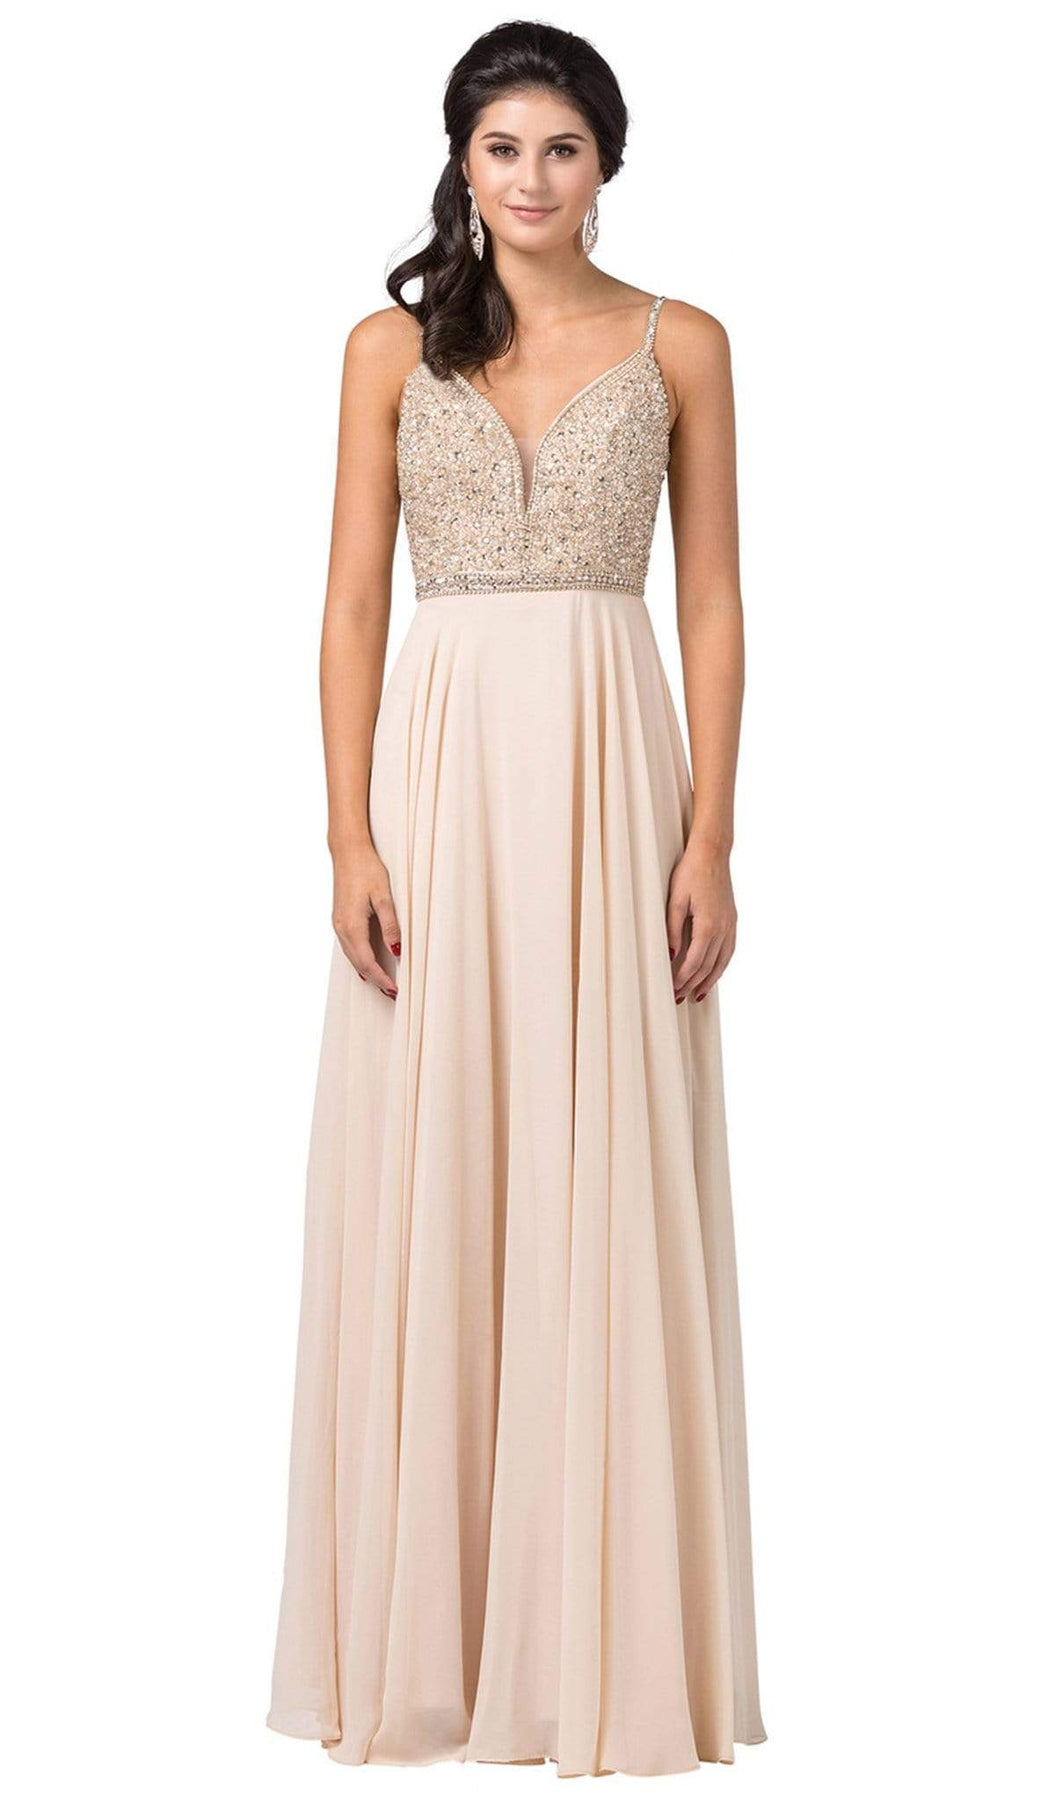 Dancing Queen - 2493 Jewel Beaded A-Line Chiffon Gown Prom Dresses XS / Champagne